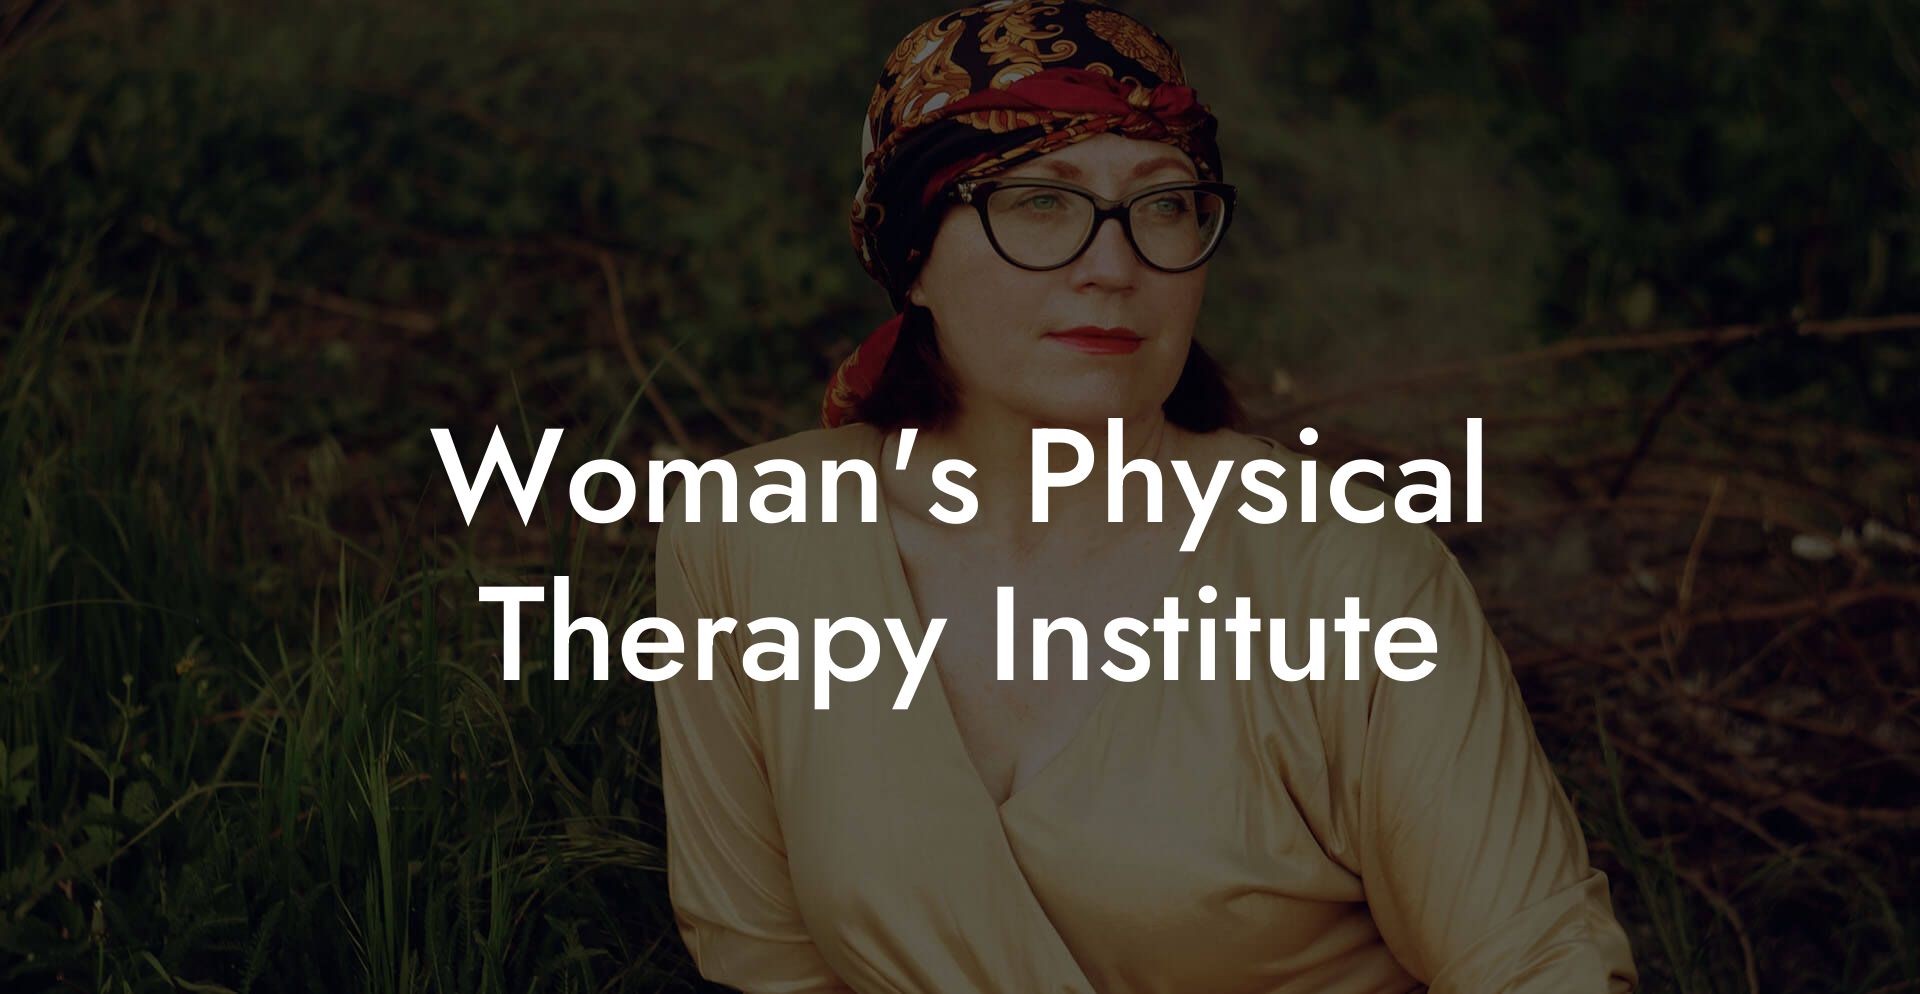 Woman's Physical Therapy Institute